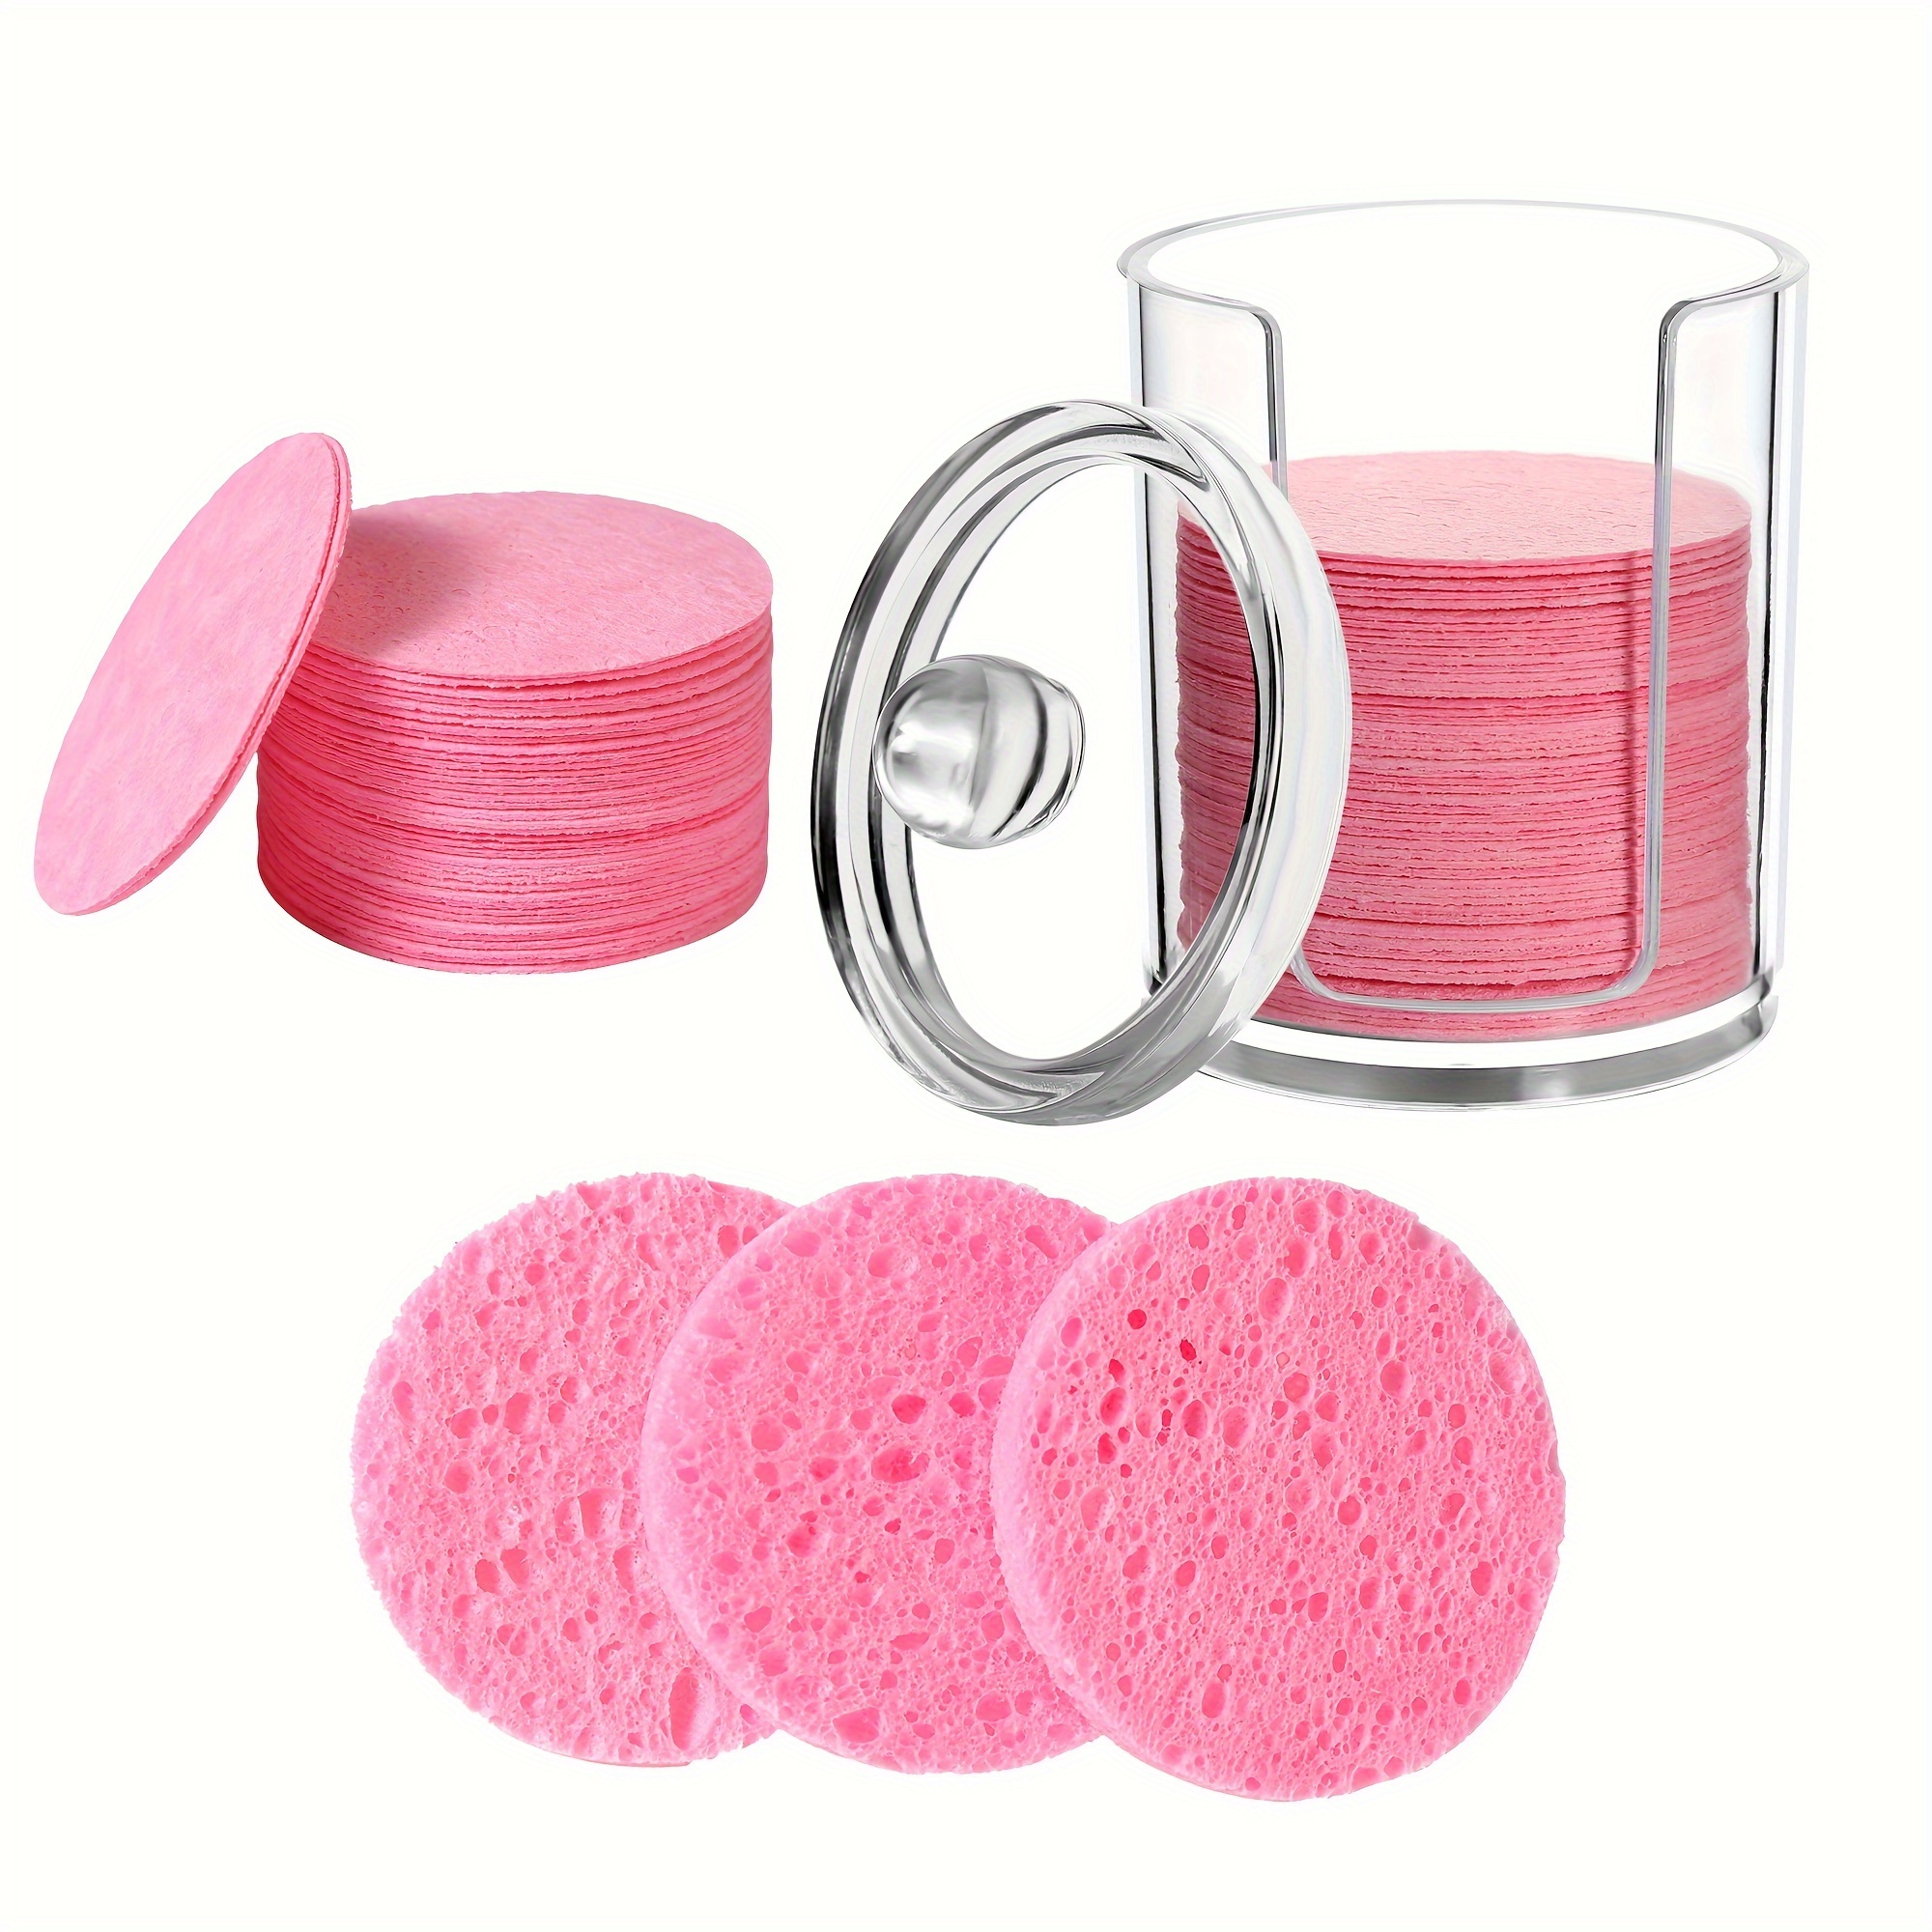 

50 Pieces Compressed Natural Facial Sponges Round Soft Face Exfoliator Cleansing Sponge Reusable Cosmetic Sponge With Clear Sponge Storage Jar, Makeup Removal - Facial Care Gifts For Mother